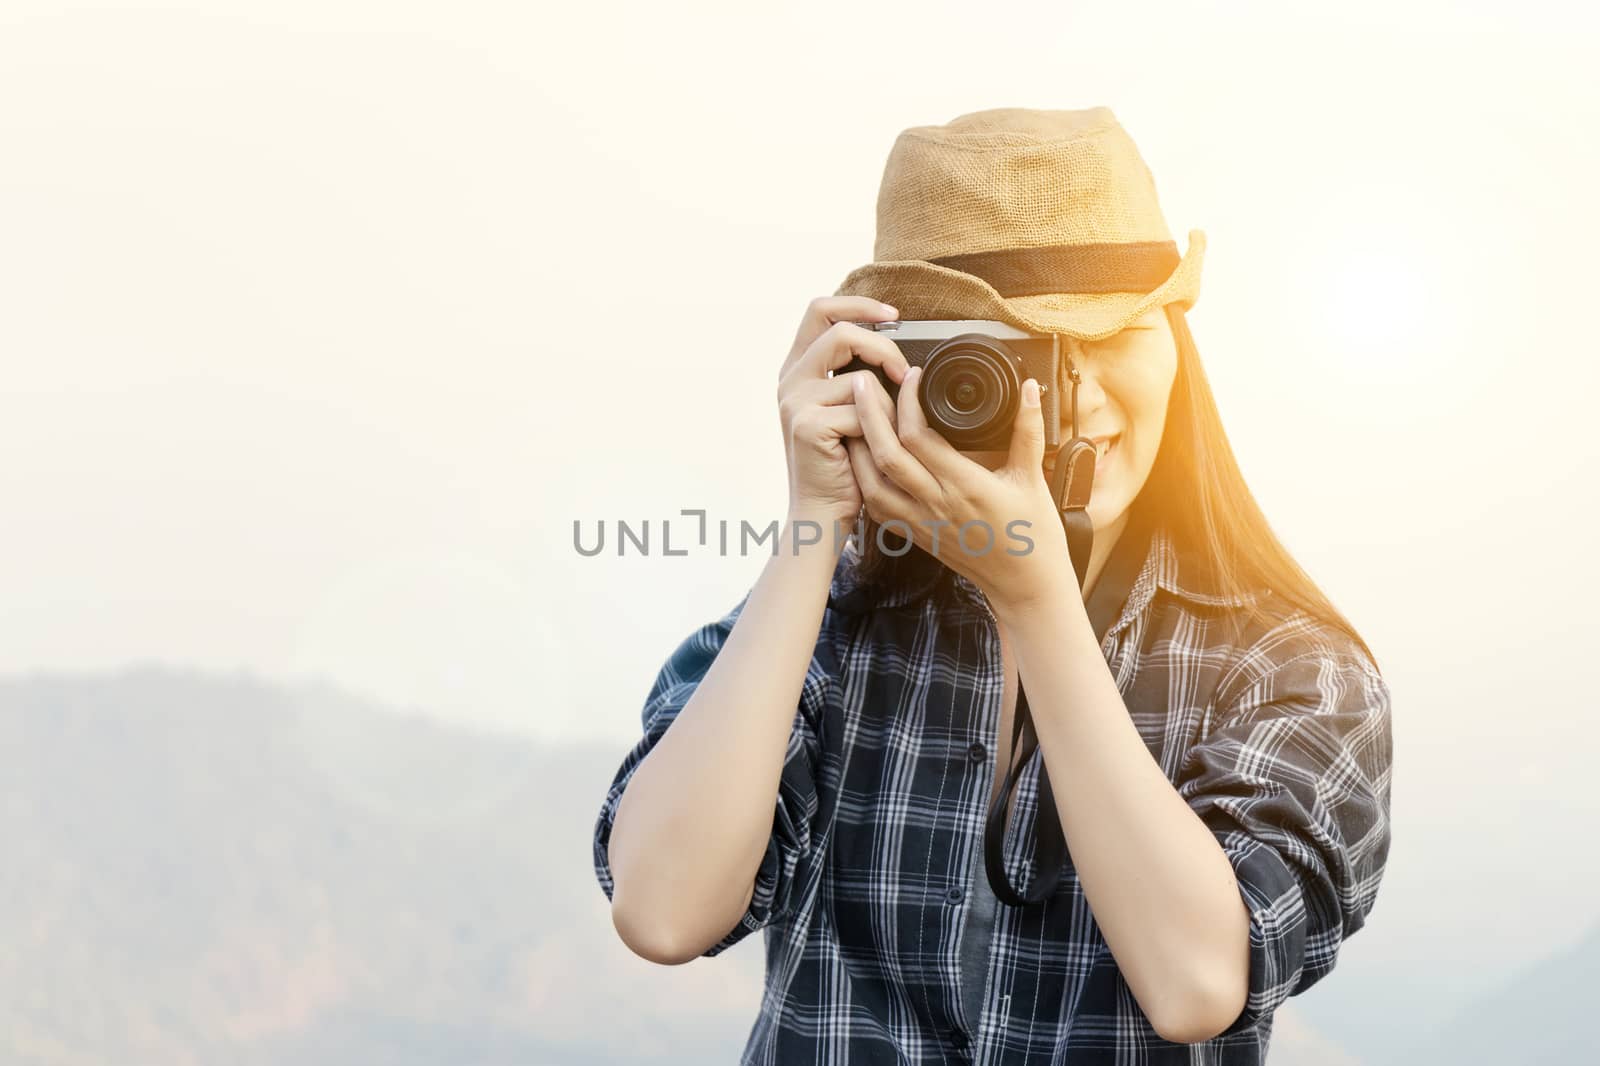 Travel Lifestyle vacations concept : Happy female traveler with camera making photo for good memory in tourist landmark at sunrise